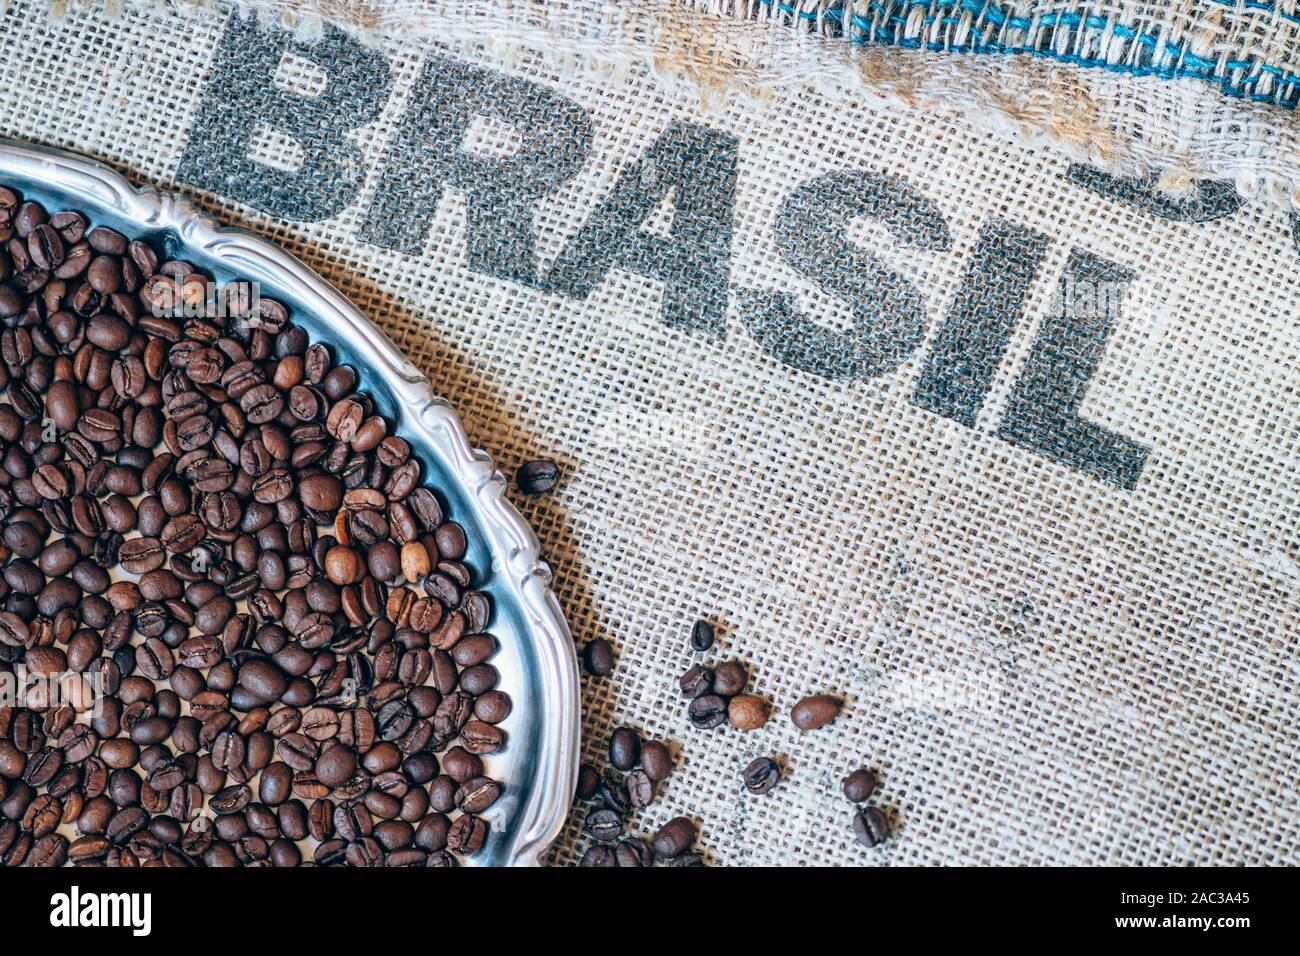 coffee beans on jute sack and printed Brasil on background Stock Photo